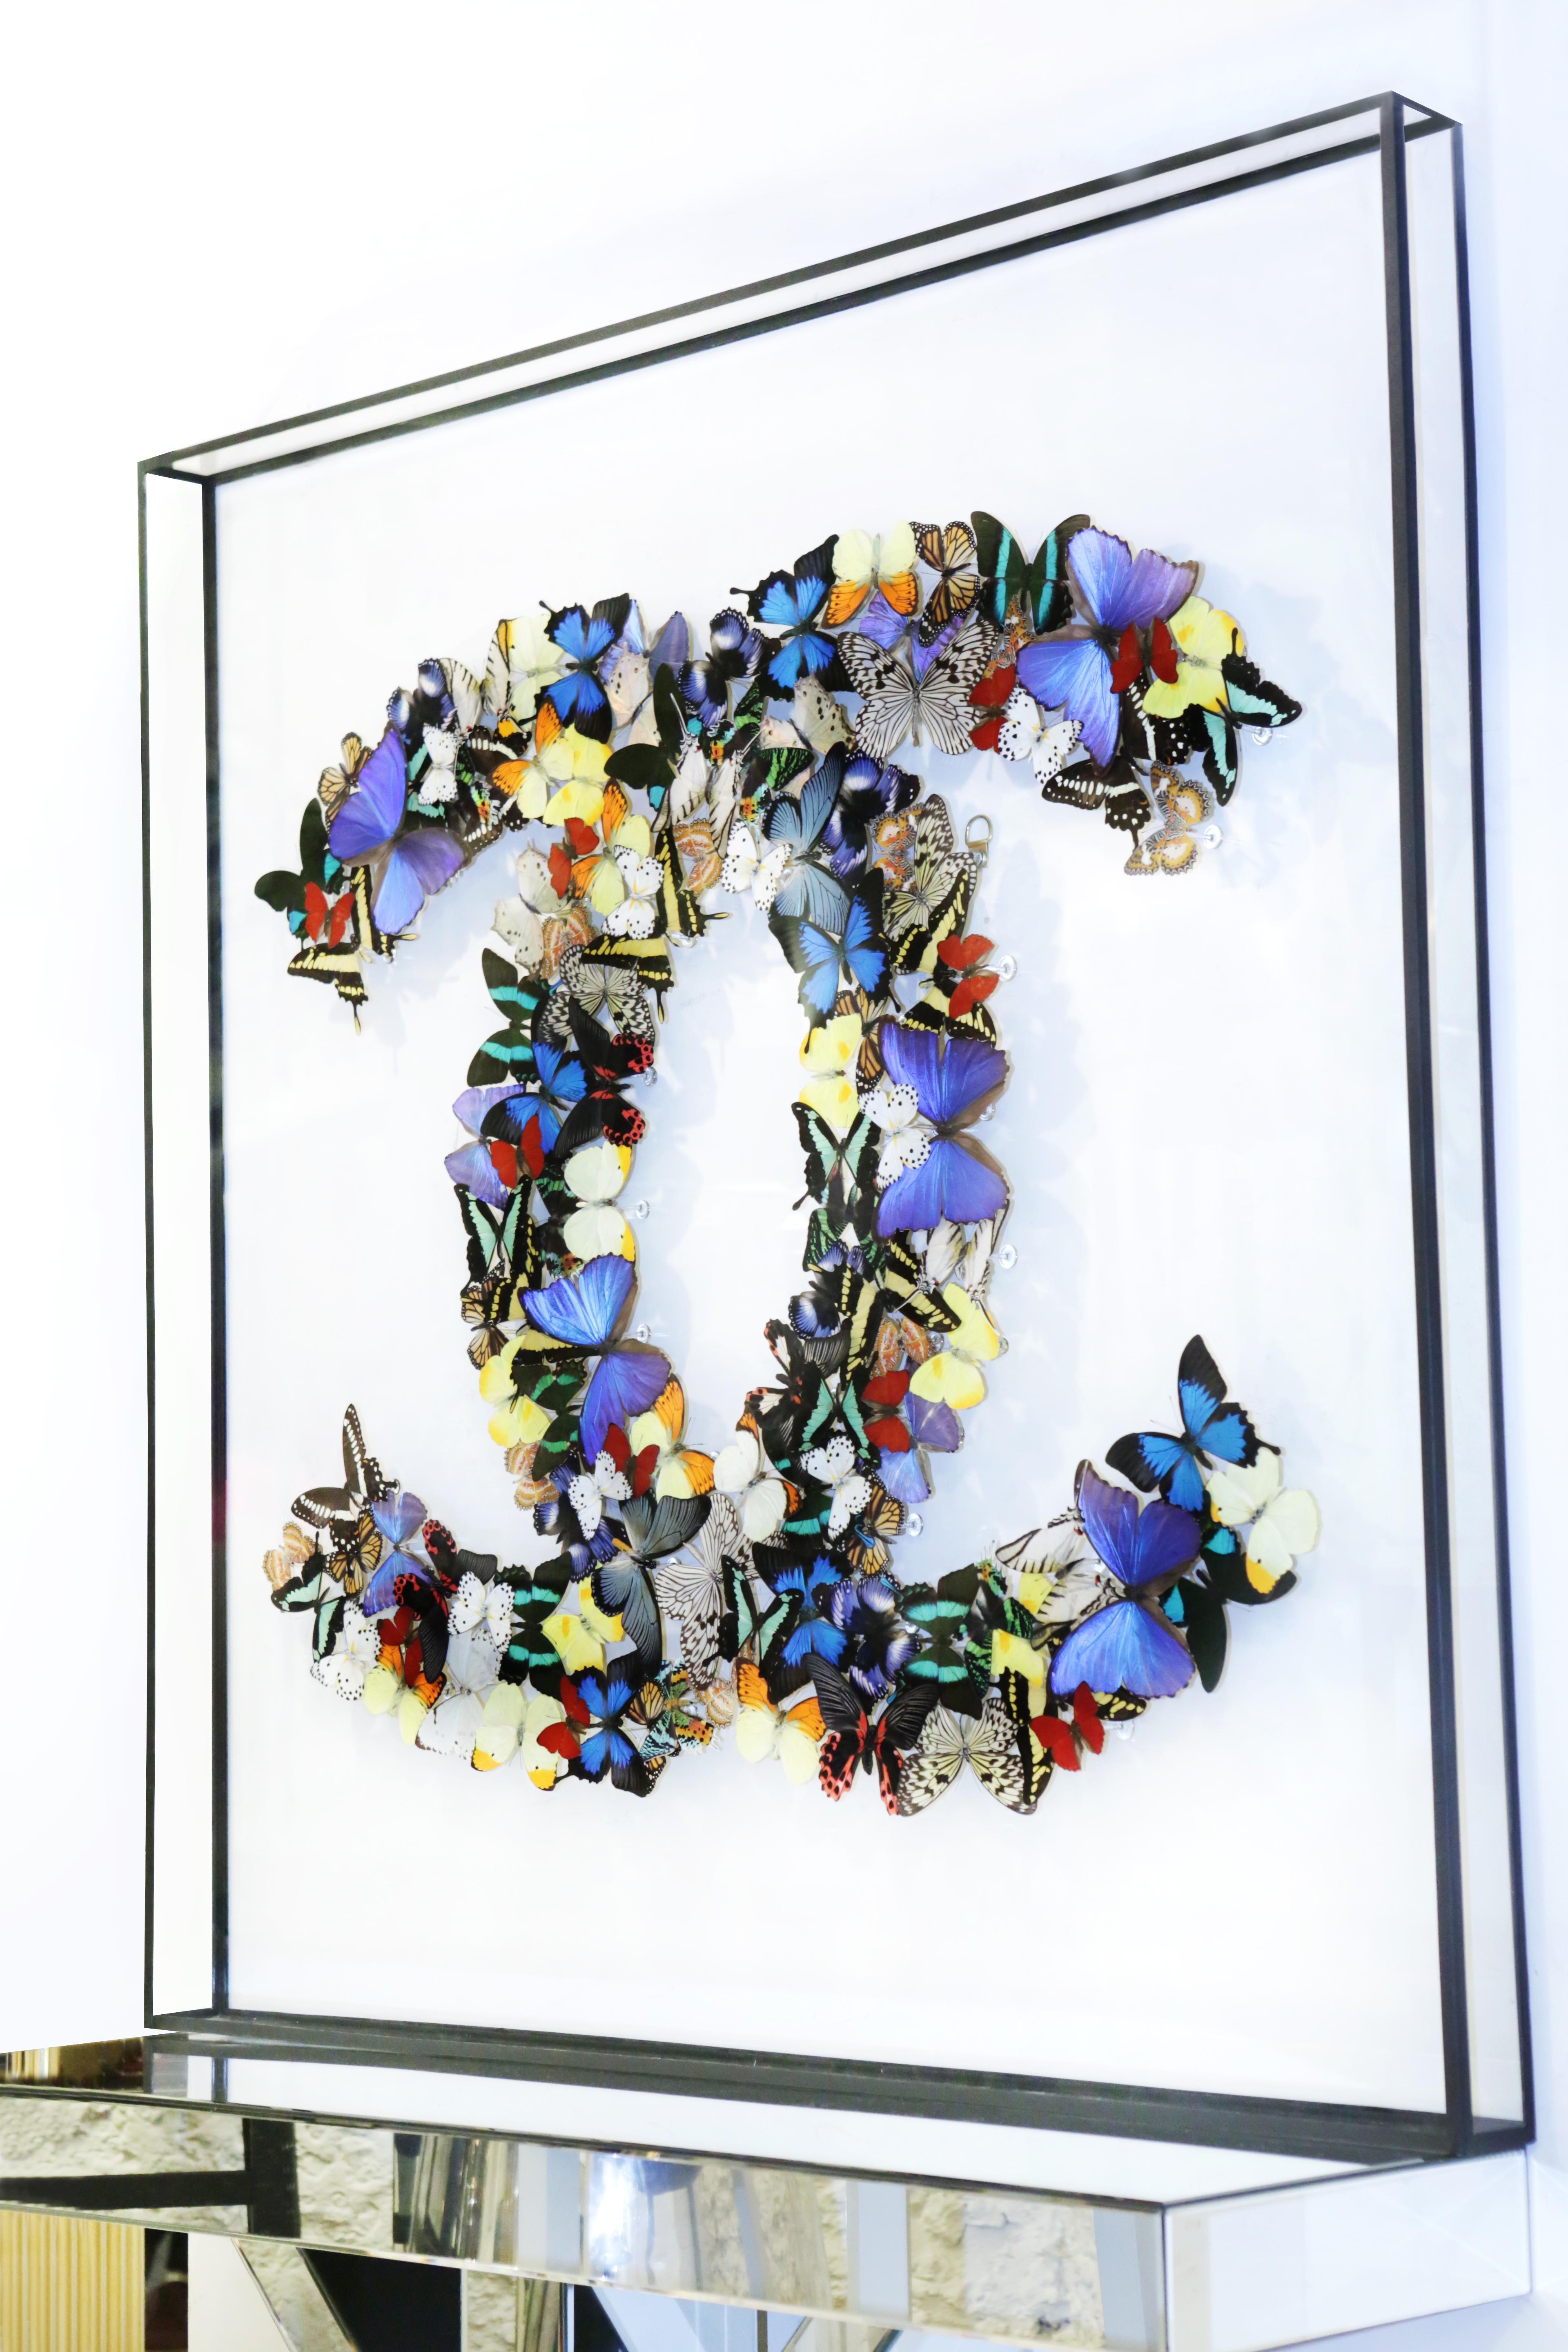 Wall decoration double Chanel butterflies under
glass box frame, anti UV glass, with real multicolored
butterflies from bredding farms. Exceptional and unique
piece made in France by Olivier Violo.